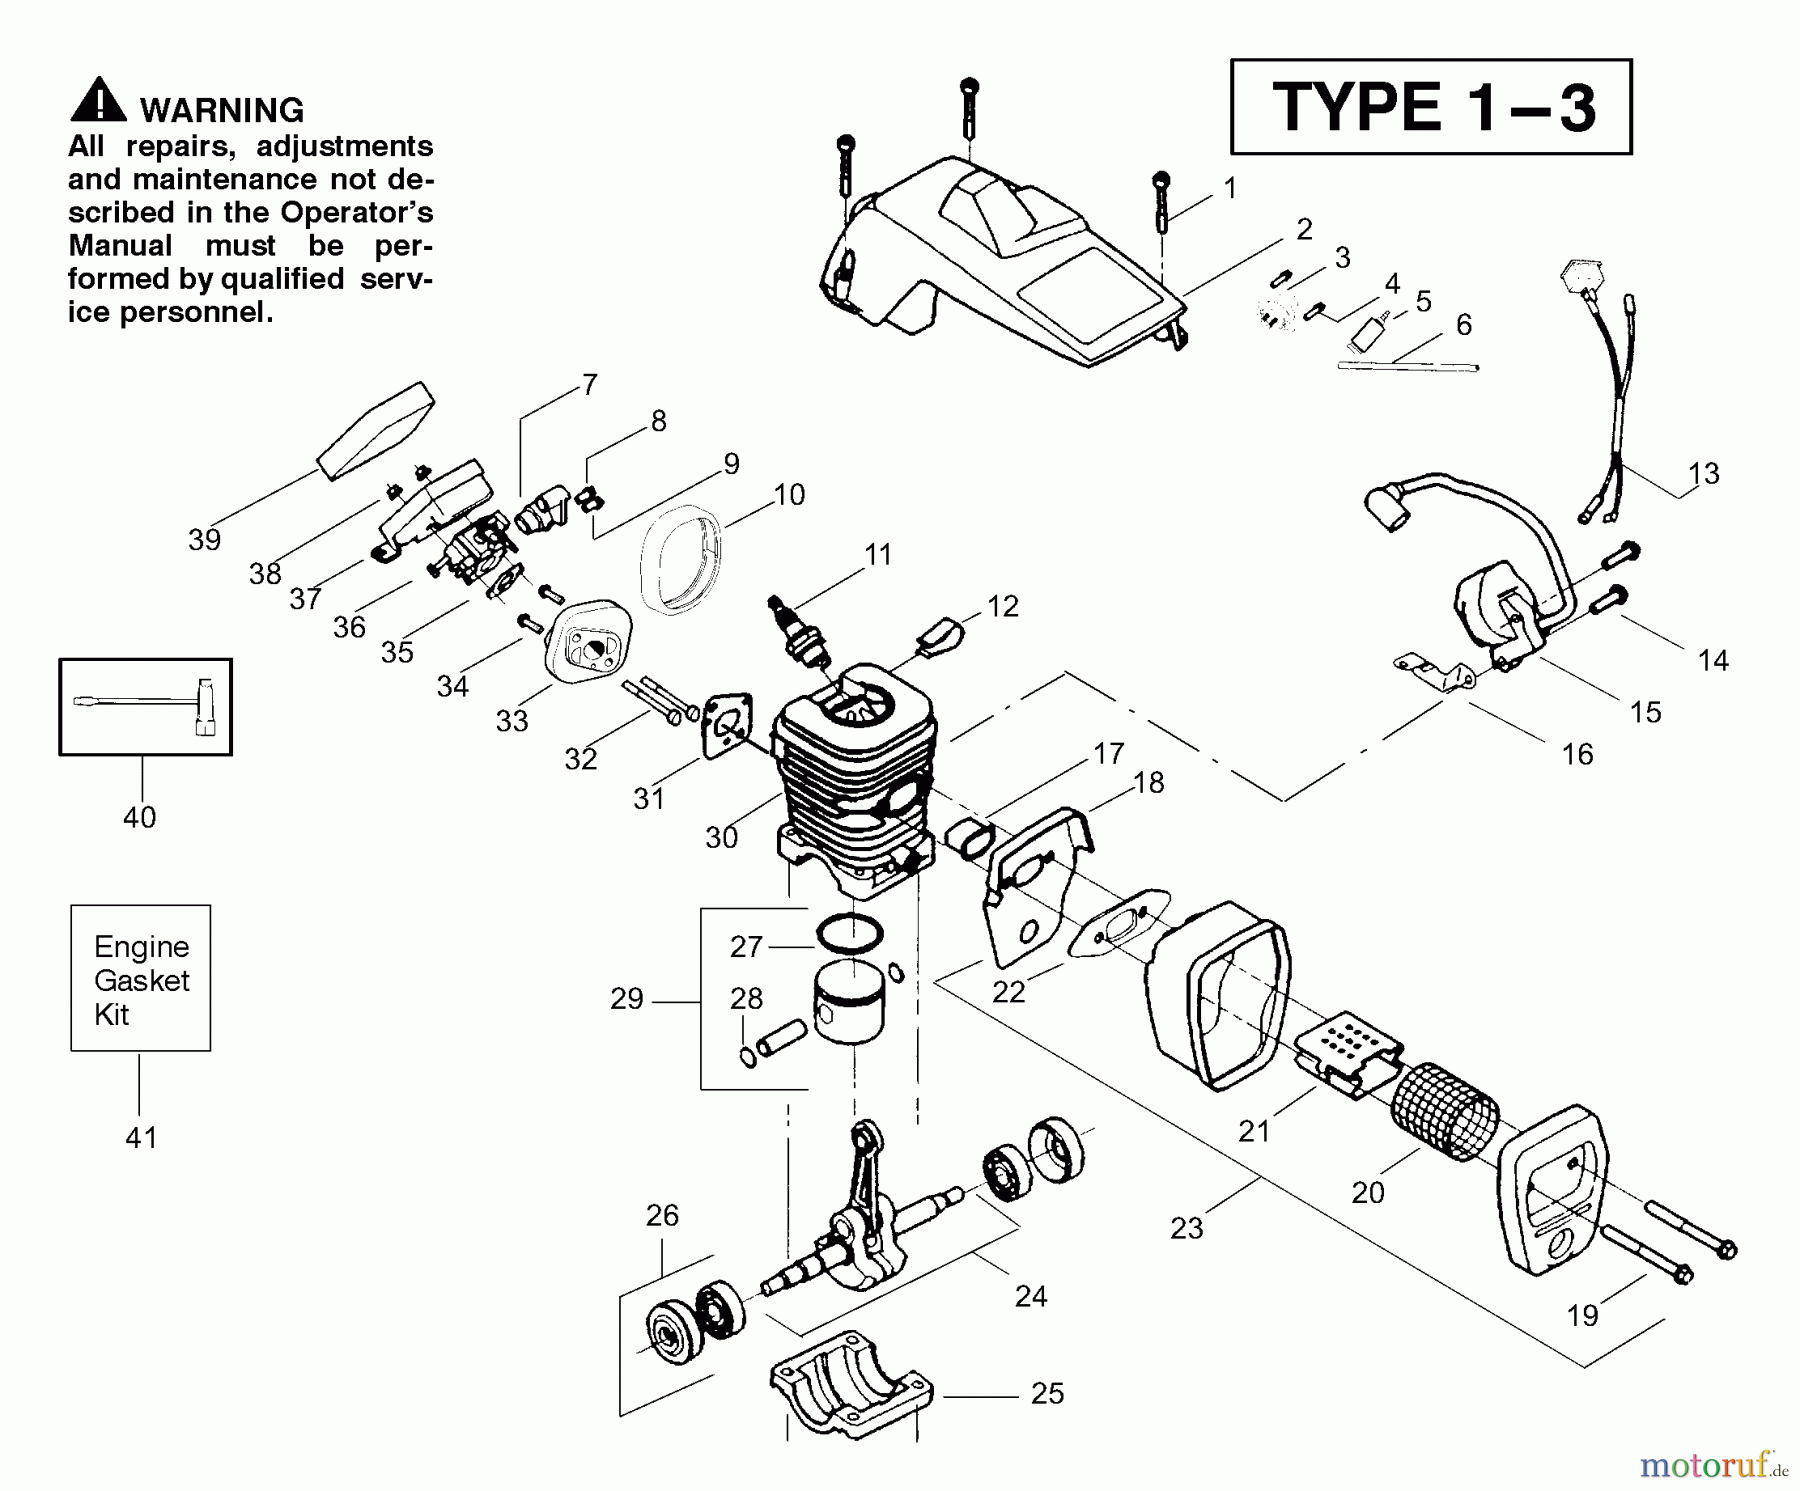  Poulan / Weed Eater Motorsägen PP221 (Type 2) - Poulan Pro Chainsaw Engine Assembly Type 1-3